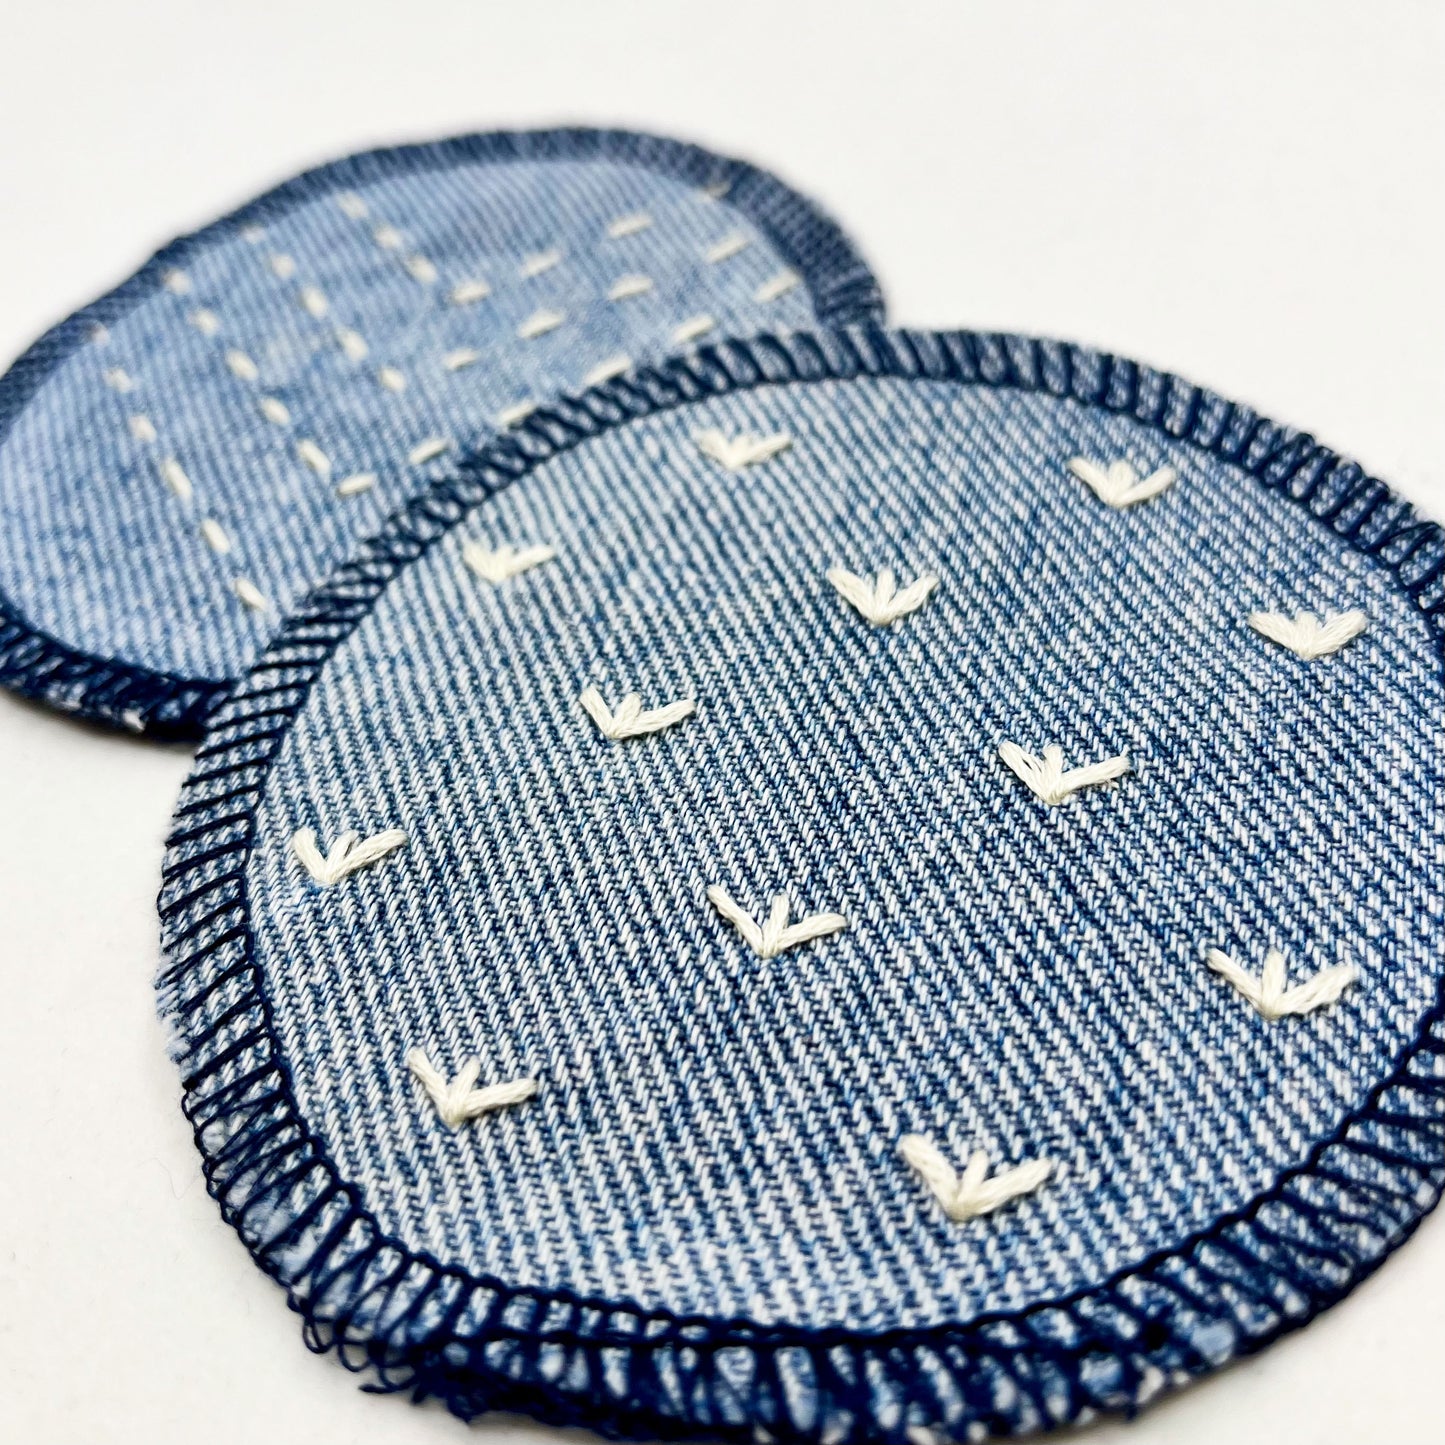 close up angled view of two circle shaped patches made out of denim, with overlocked edges, one with stitches in ivory that look like sprouts or birds feet, the other with rows of running stitches in a chevron pattern